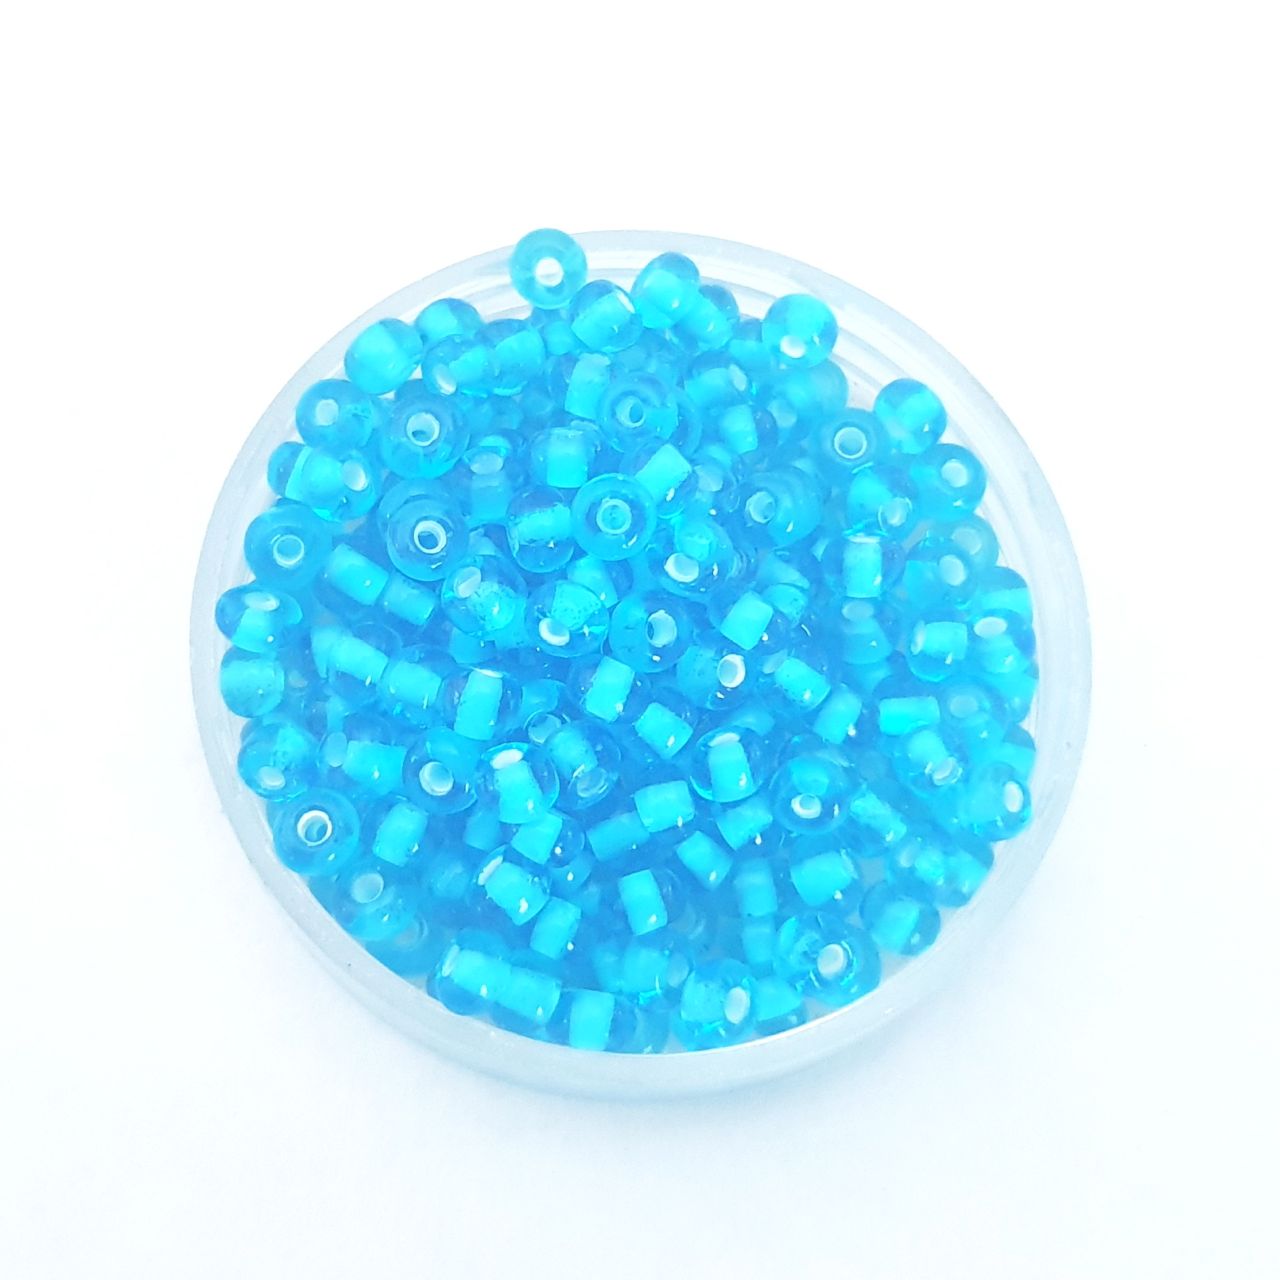 5 0 4.5mm Turquoise White Heart Czech Seed Bead